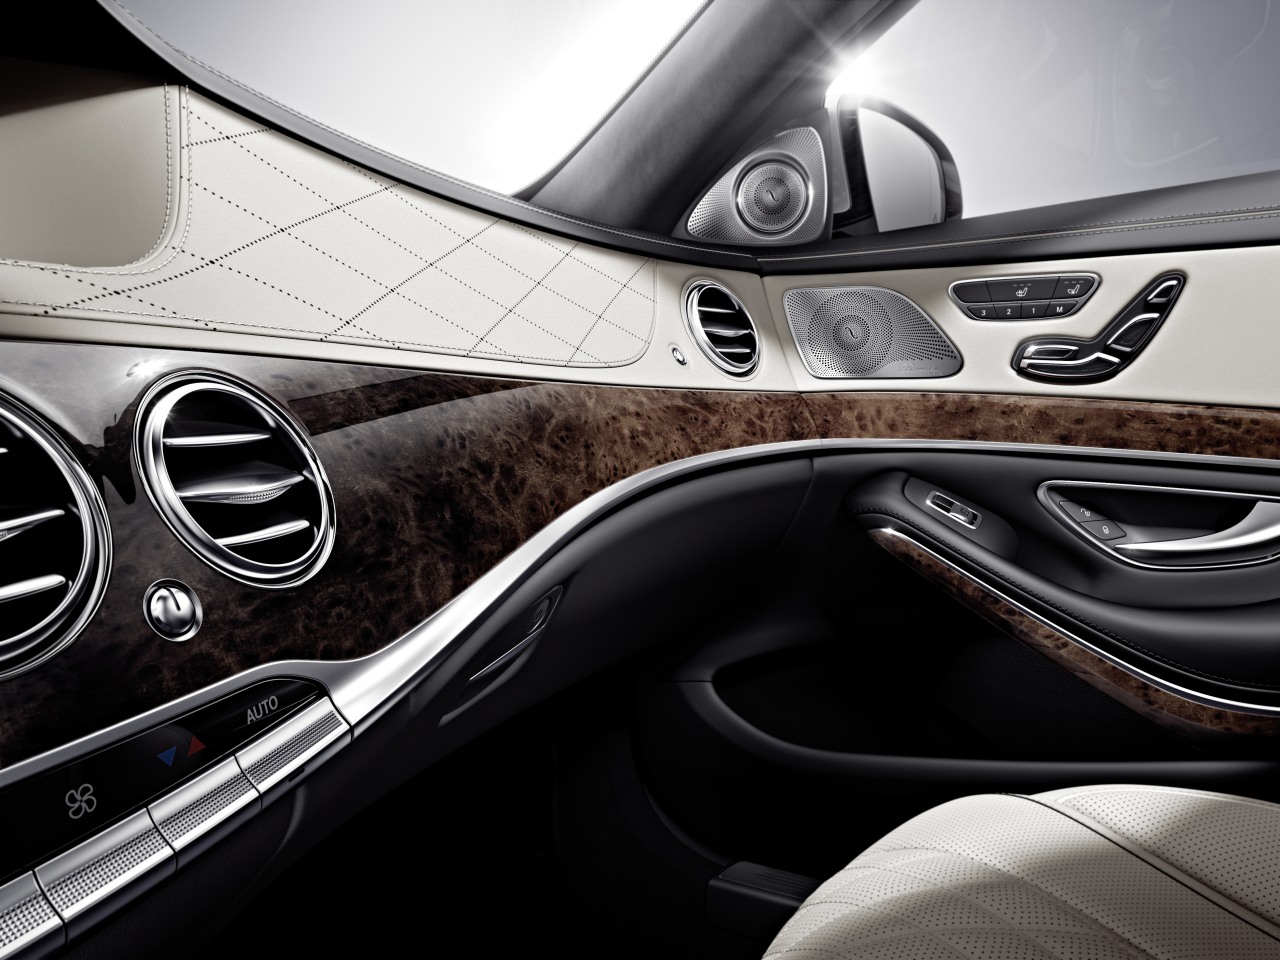 2014 Mercedes-Benz S-Class interior images revealed